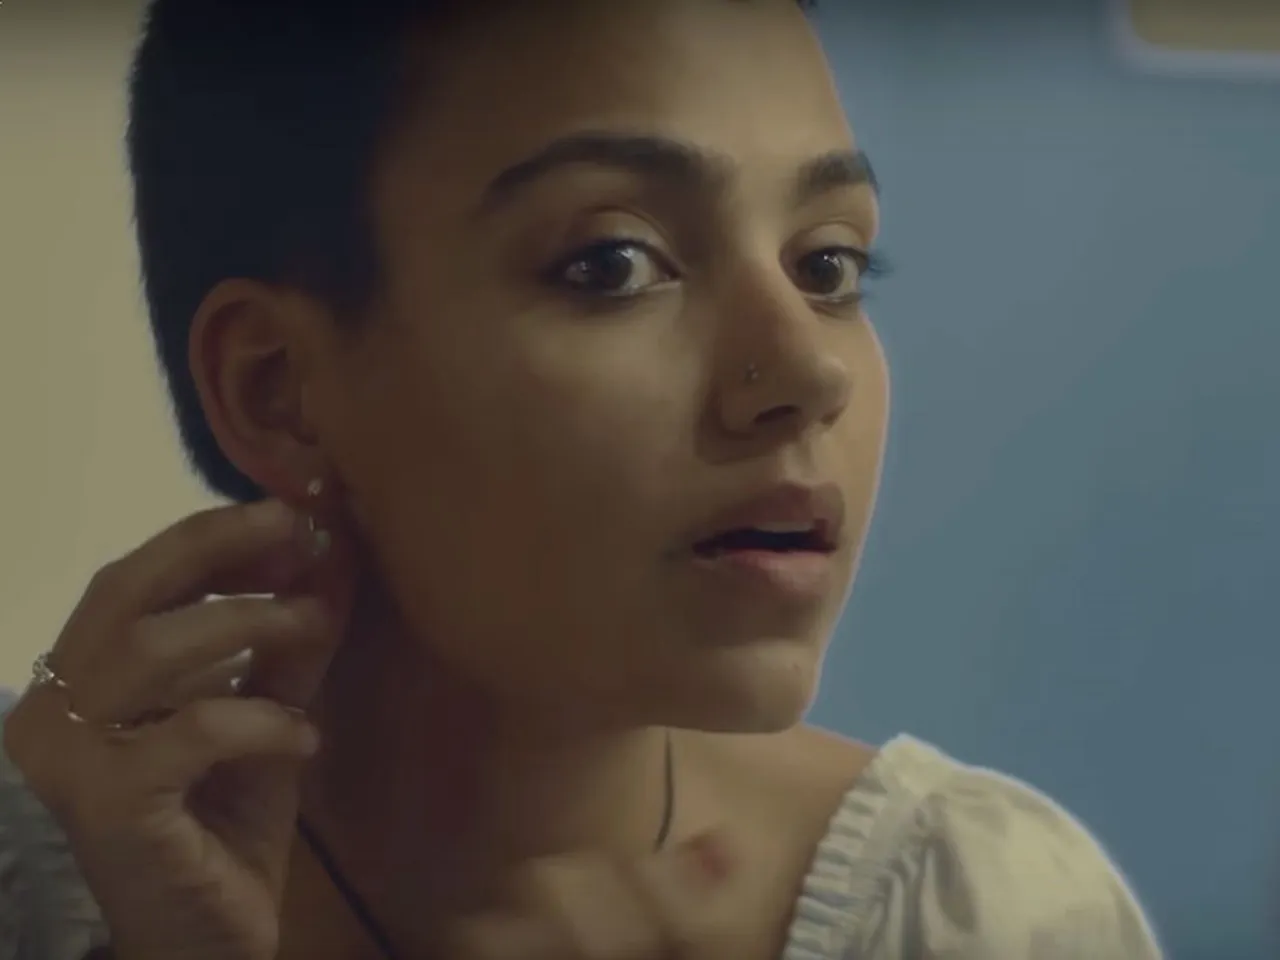 [Campaign Review] Mia by Tanishq reinforces power of working women with #BestAtWork